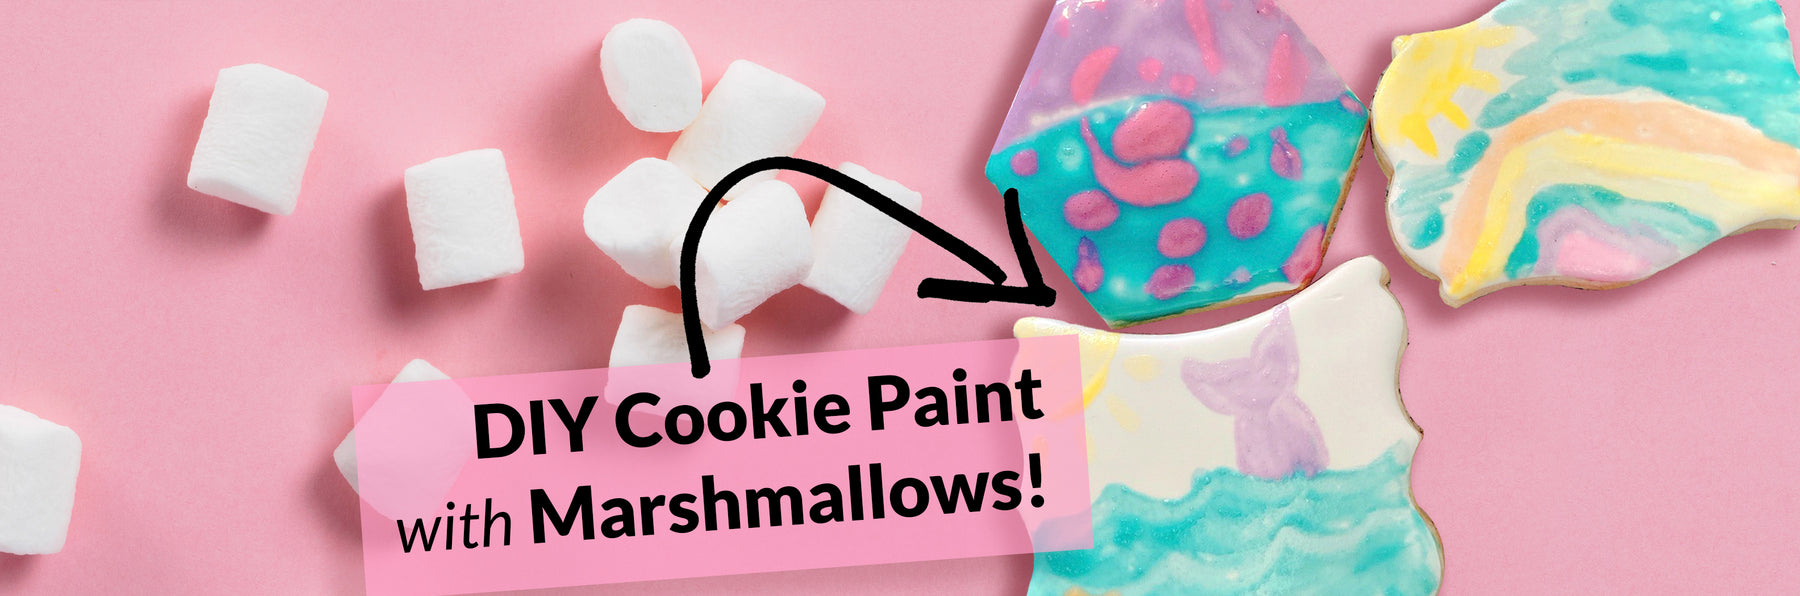 Make DIY Cookie Paint with Marshmallows